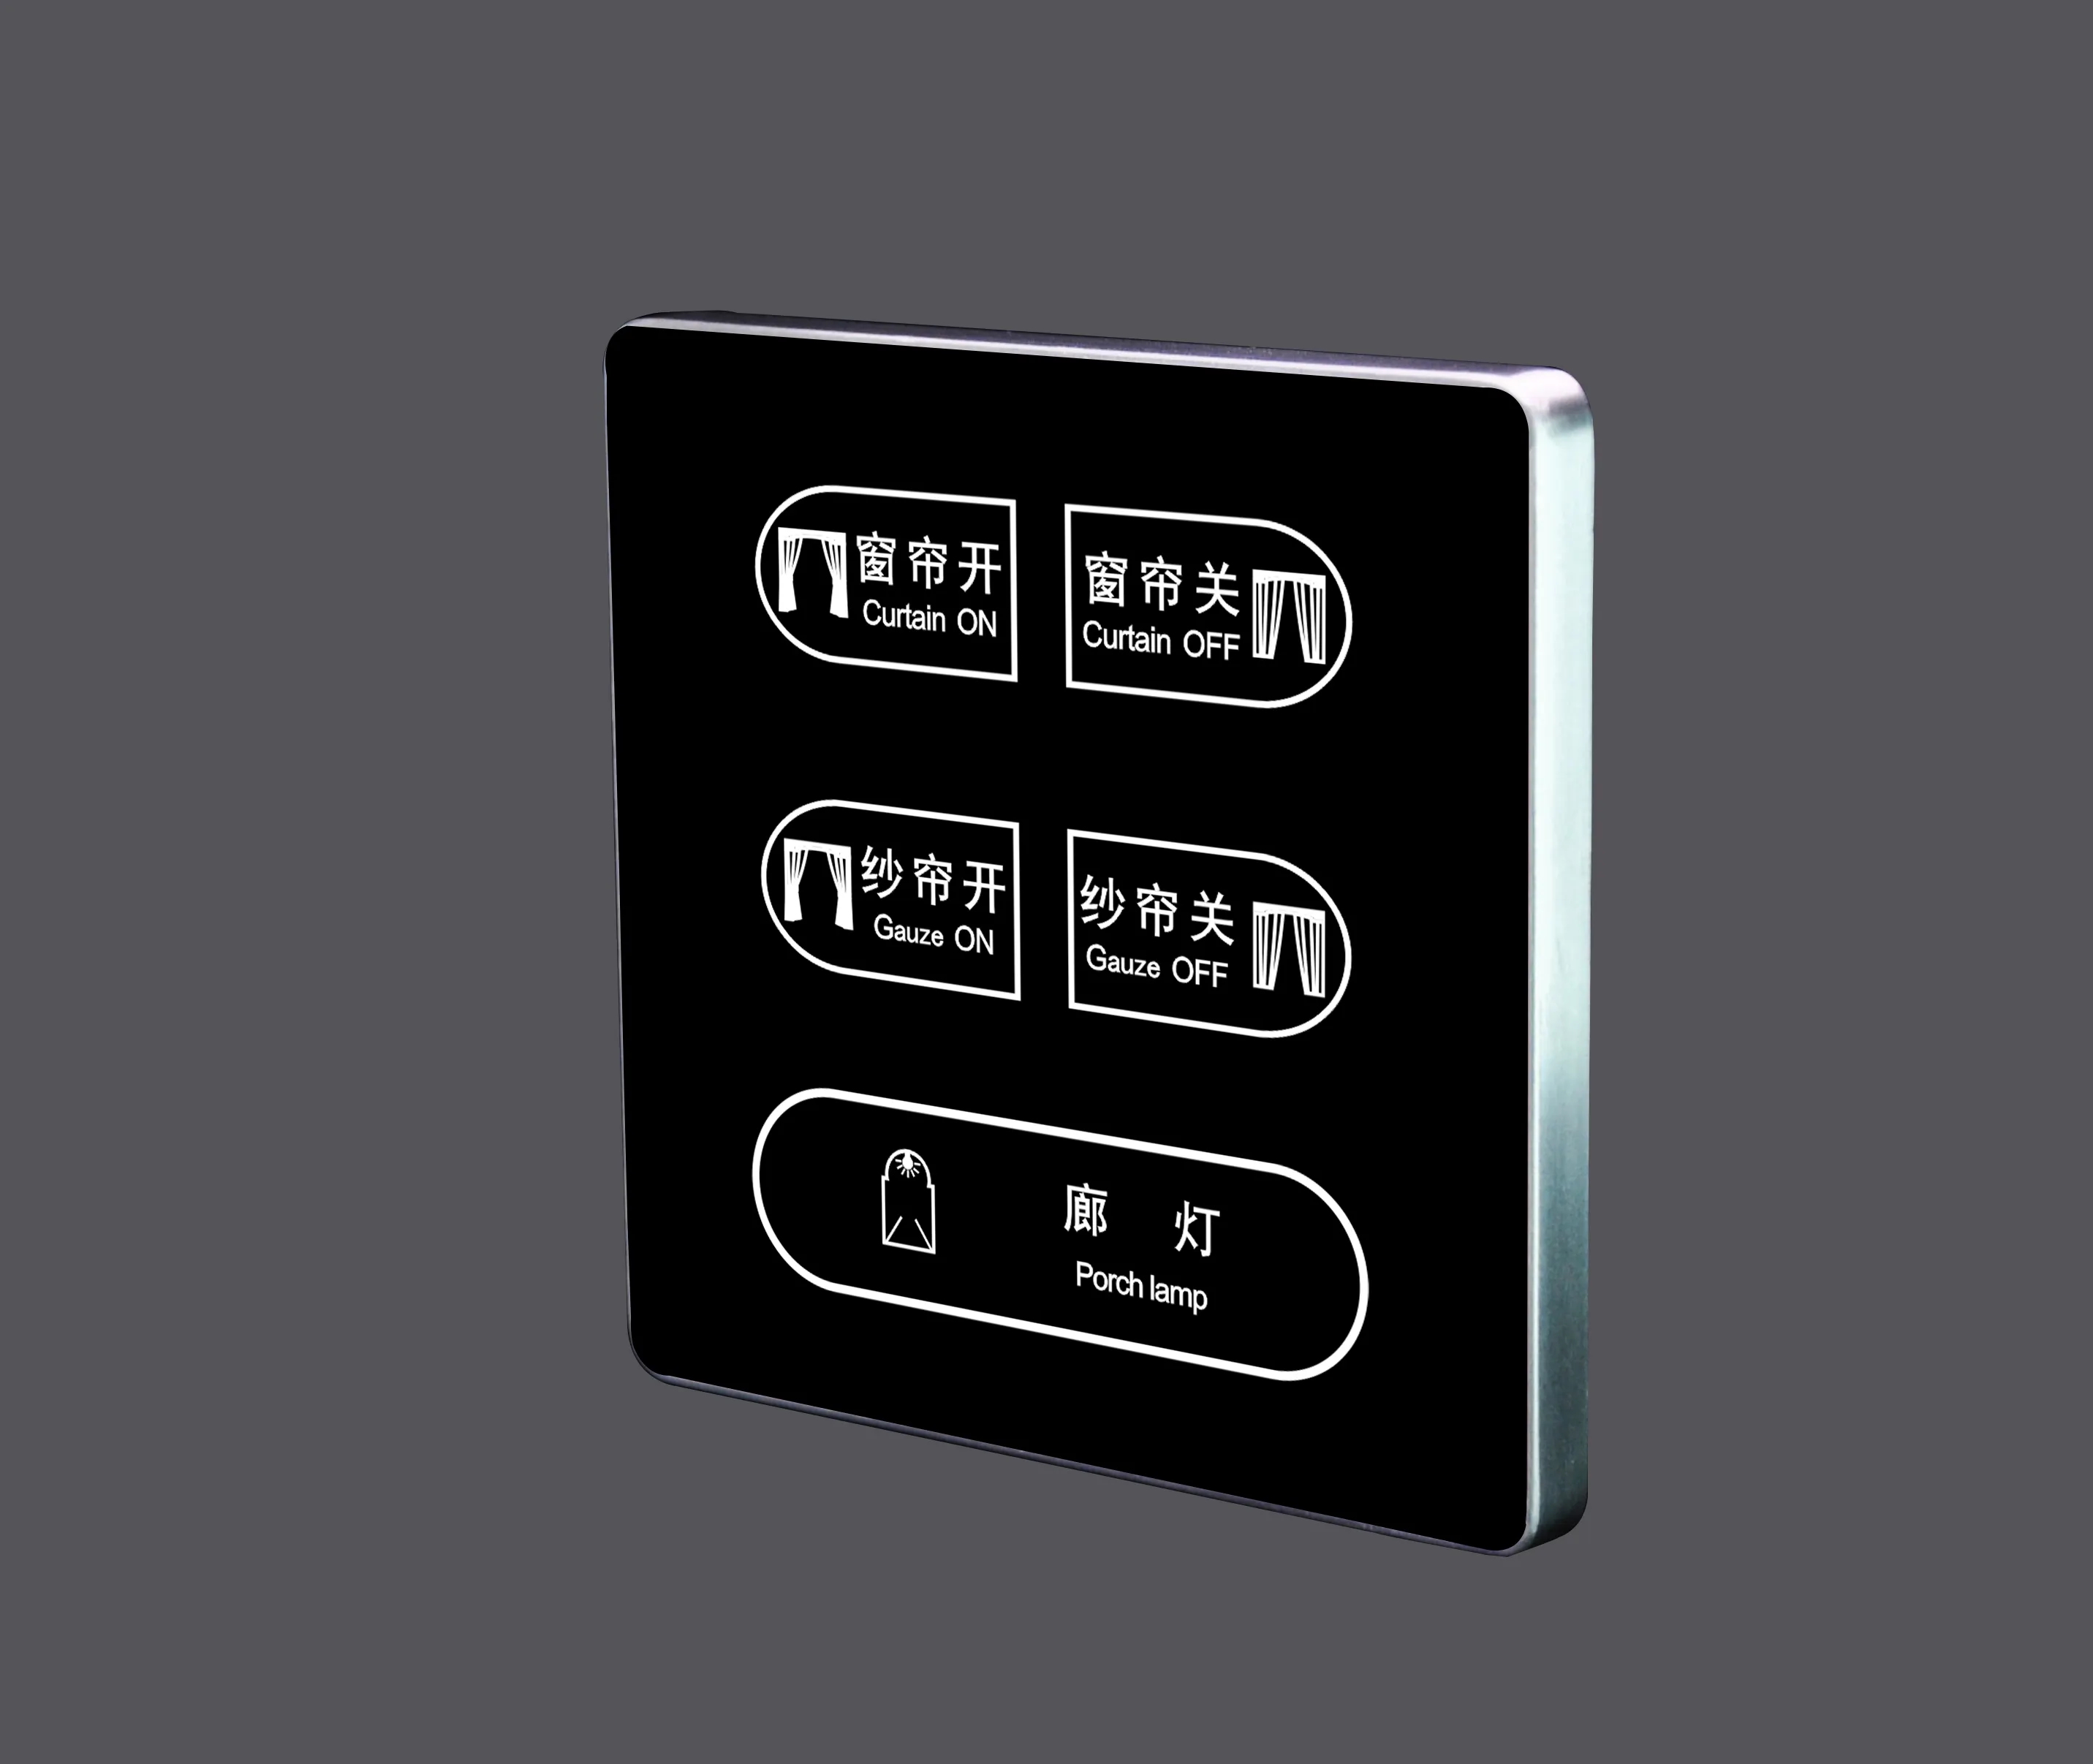 Hotel Switch High Quality Crystal Glass Panel Touch Switch Hotel Light Wall Smart Switch With DND Switch Doorbell System